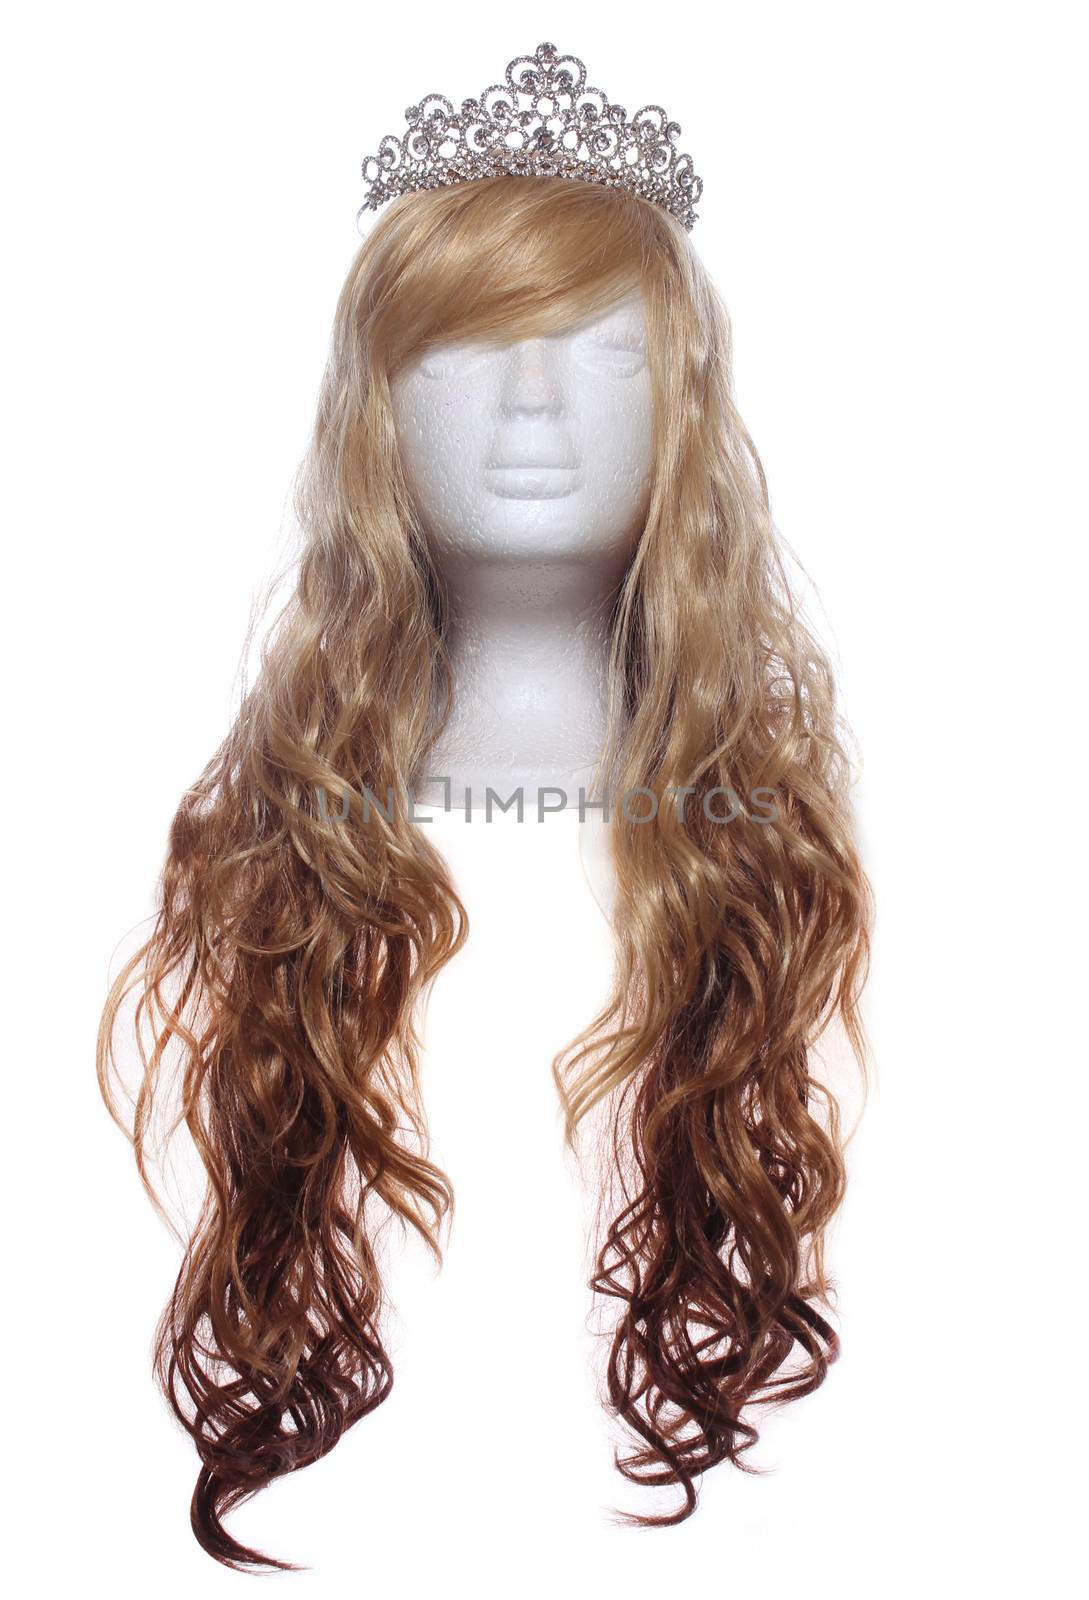 Two Toned Blond Wig on Mannequin Head with tiara by Marti157900